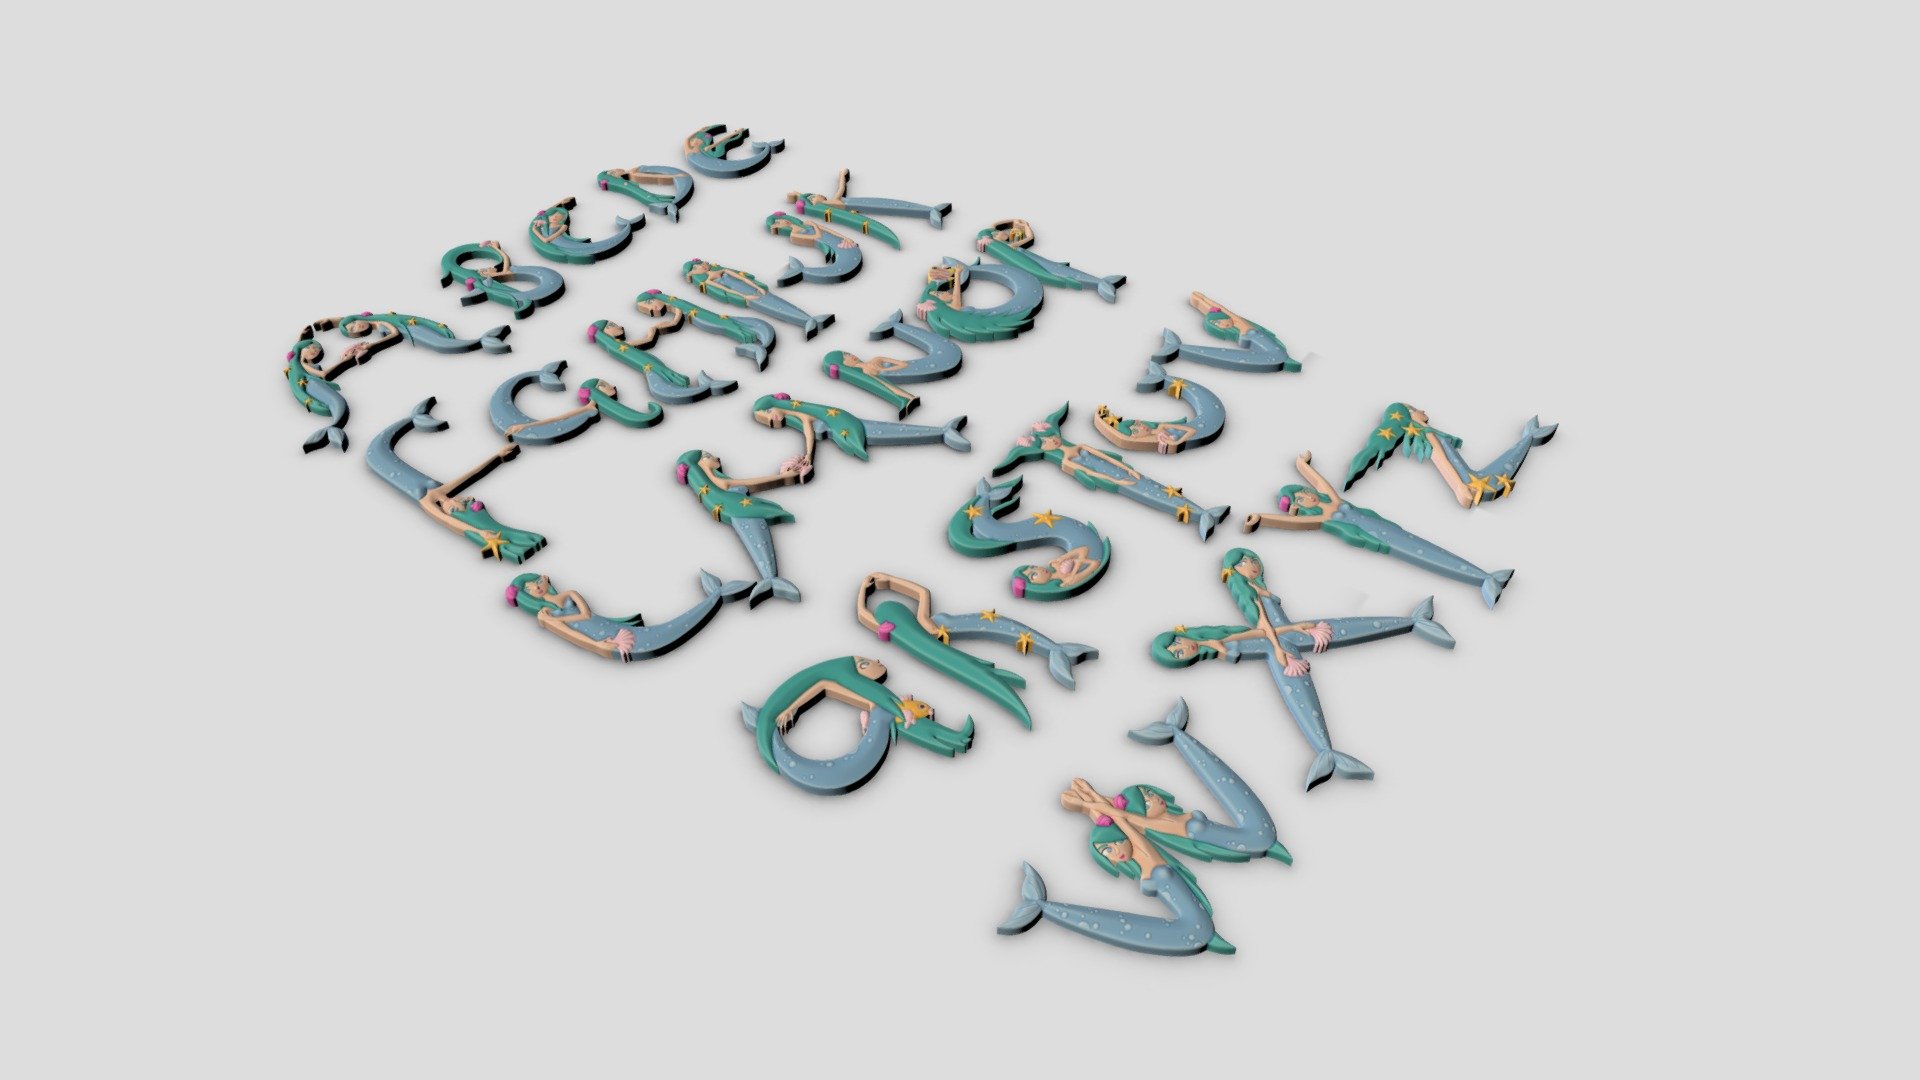 This is a mermaid based alphabet I've made using normal map to 3D and then manual sculpting in ZBrush. 1024 x 1024 Textures for the lower res uvmapped objects were painted in 3DCoat. 
I have also made decimated versions suitable for 3D printing (obj. and stl. files) from all of the sculpted letters as well.
My intention behind making this alphabet was that it would be nice used for CNC as well as for educational use 3d model